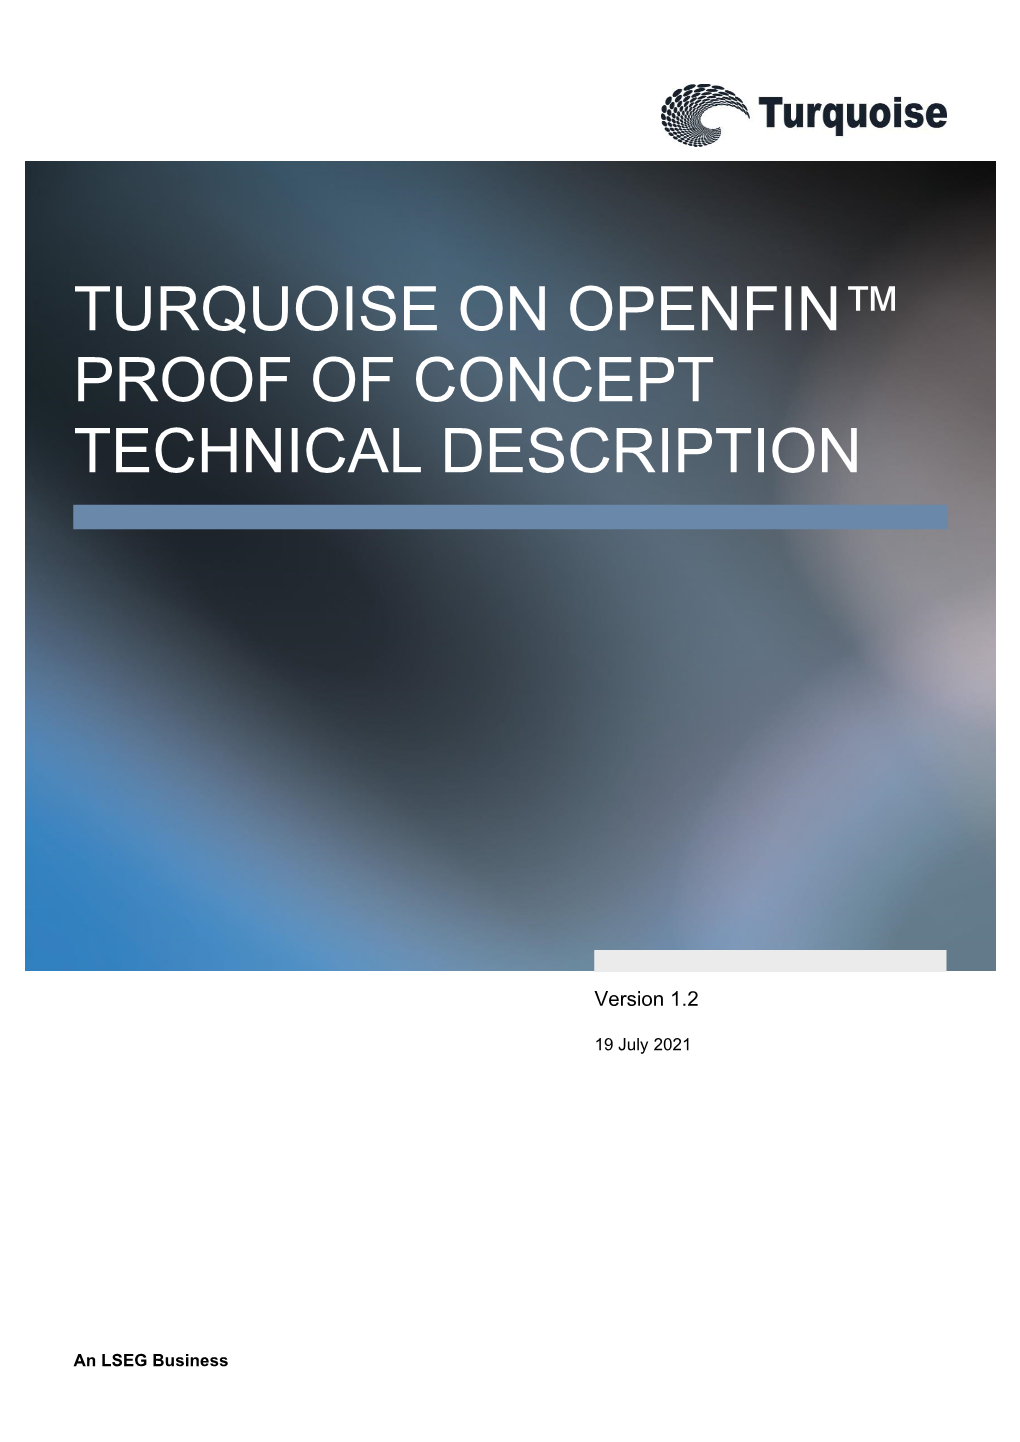 Turquoise on Openfin™ Proof of Concept Technical Description